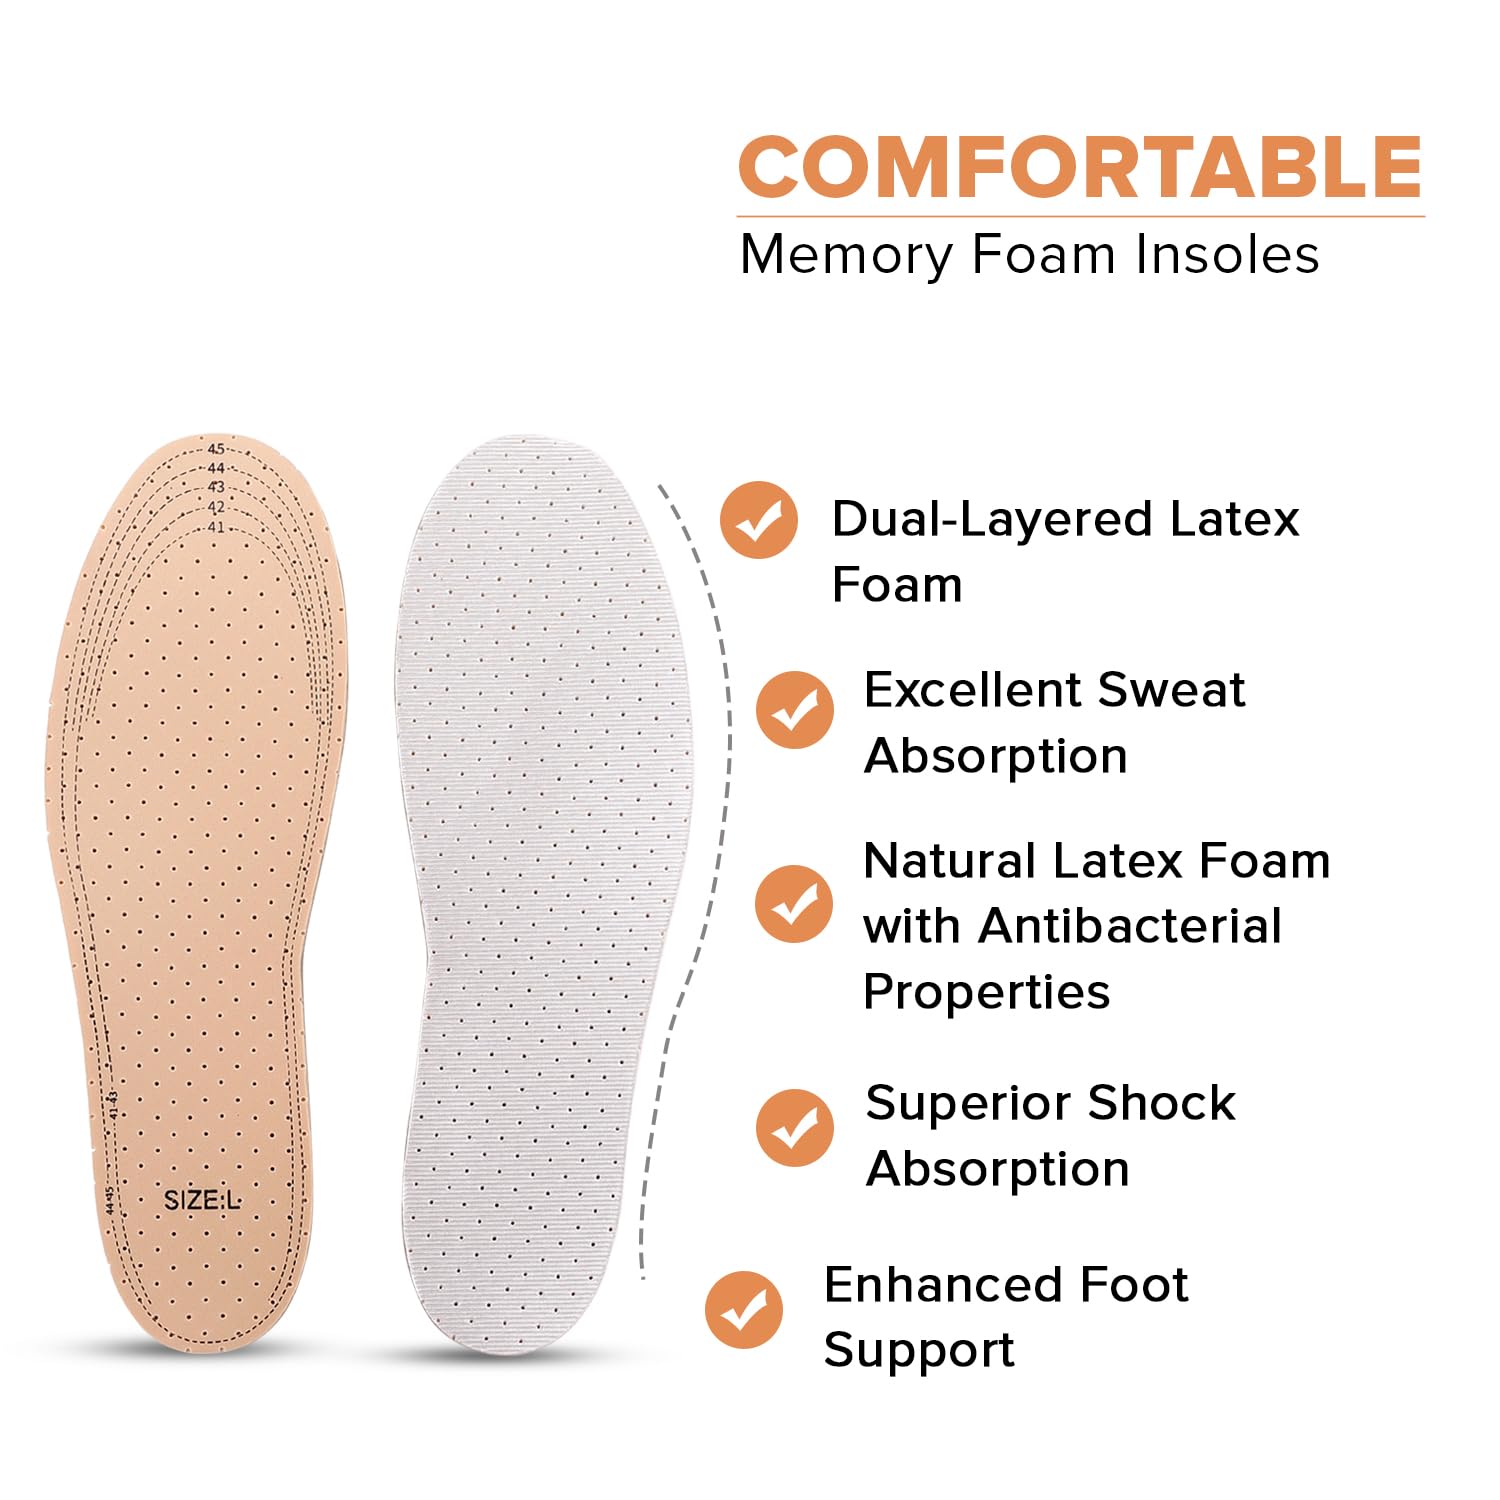 Dr Foot Double Air Pillow Insoles | Dual Layer Cushioning for Superior Foot Comfort | Double Sided Latex Foam For Breathability and Comfortable, Dry Feet | For Men & Women - 1 Pair - (Small Size)